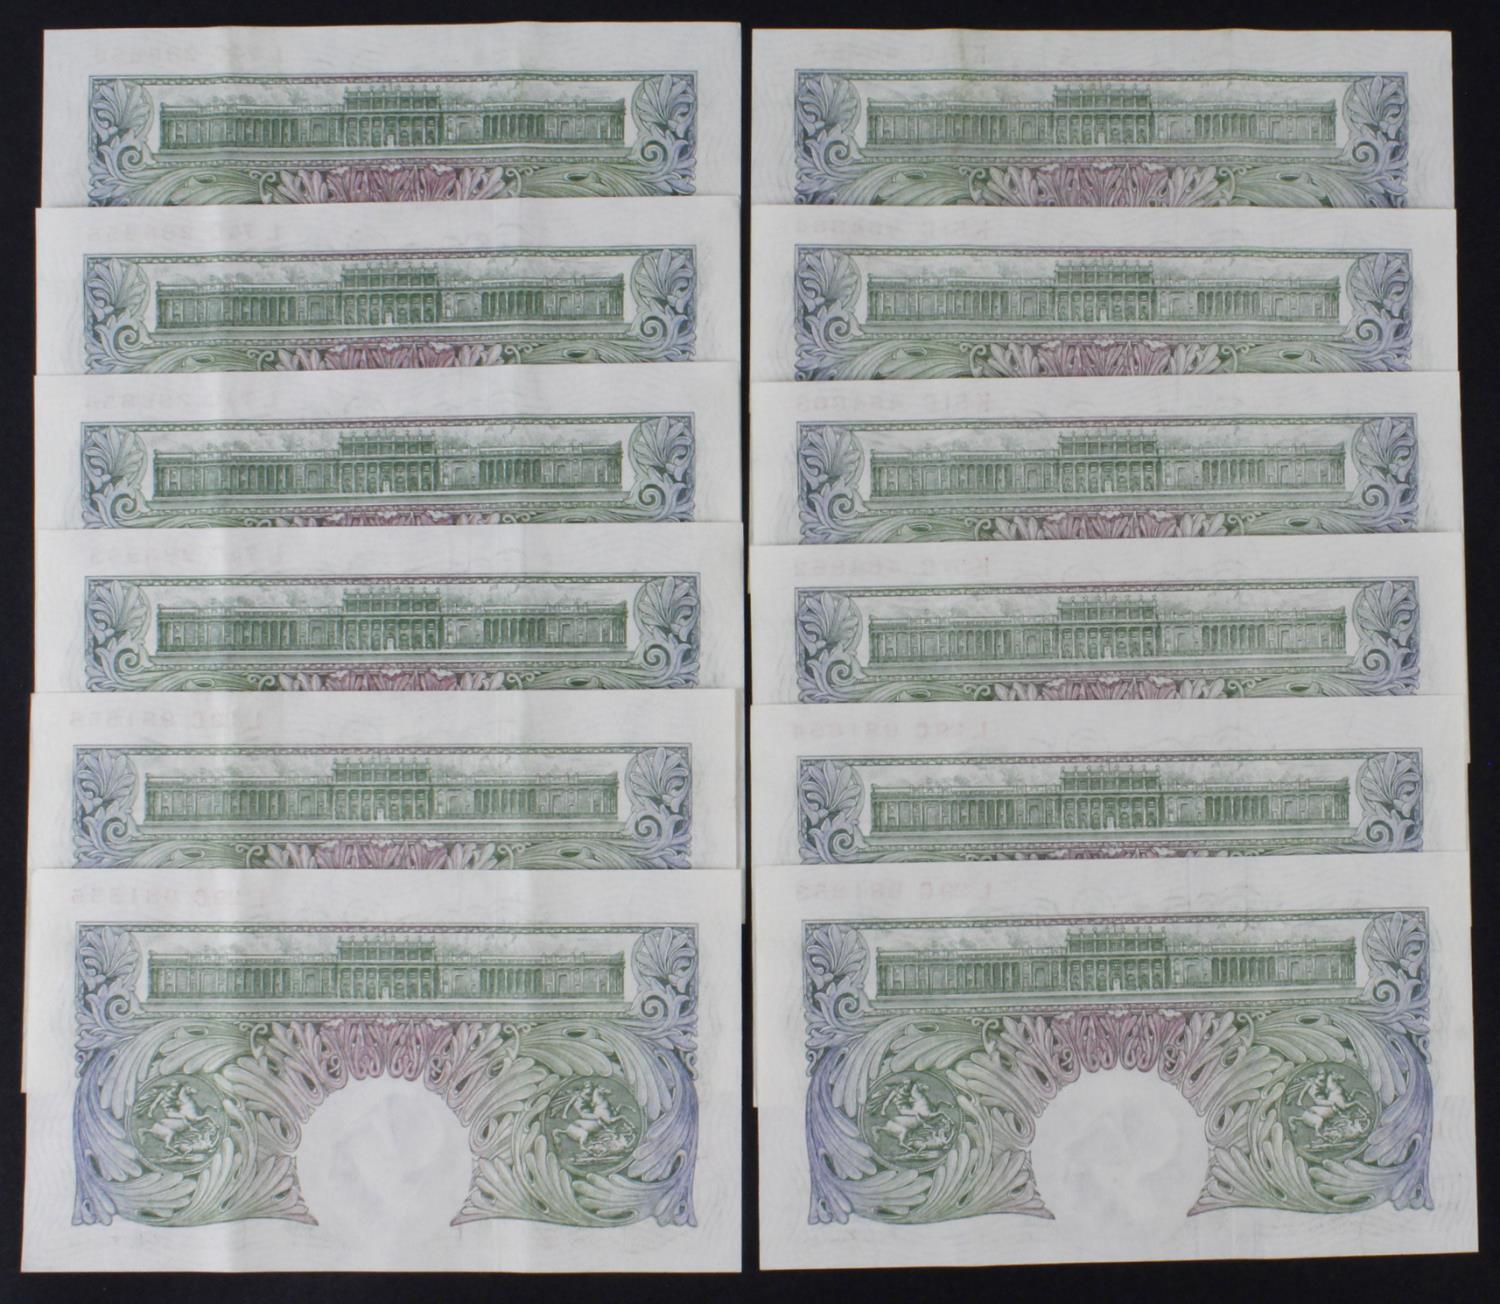 Beale 1 Pound (B268) issued 1950 (12), three consecutively numbered runs of 4 x notes in each run, - Image 2 of 2